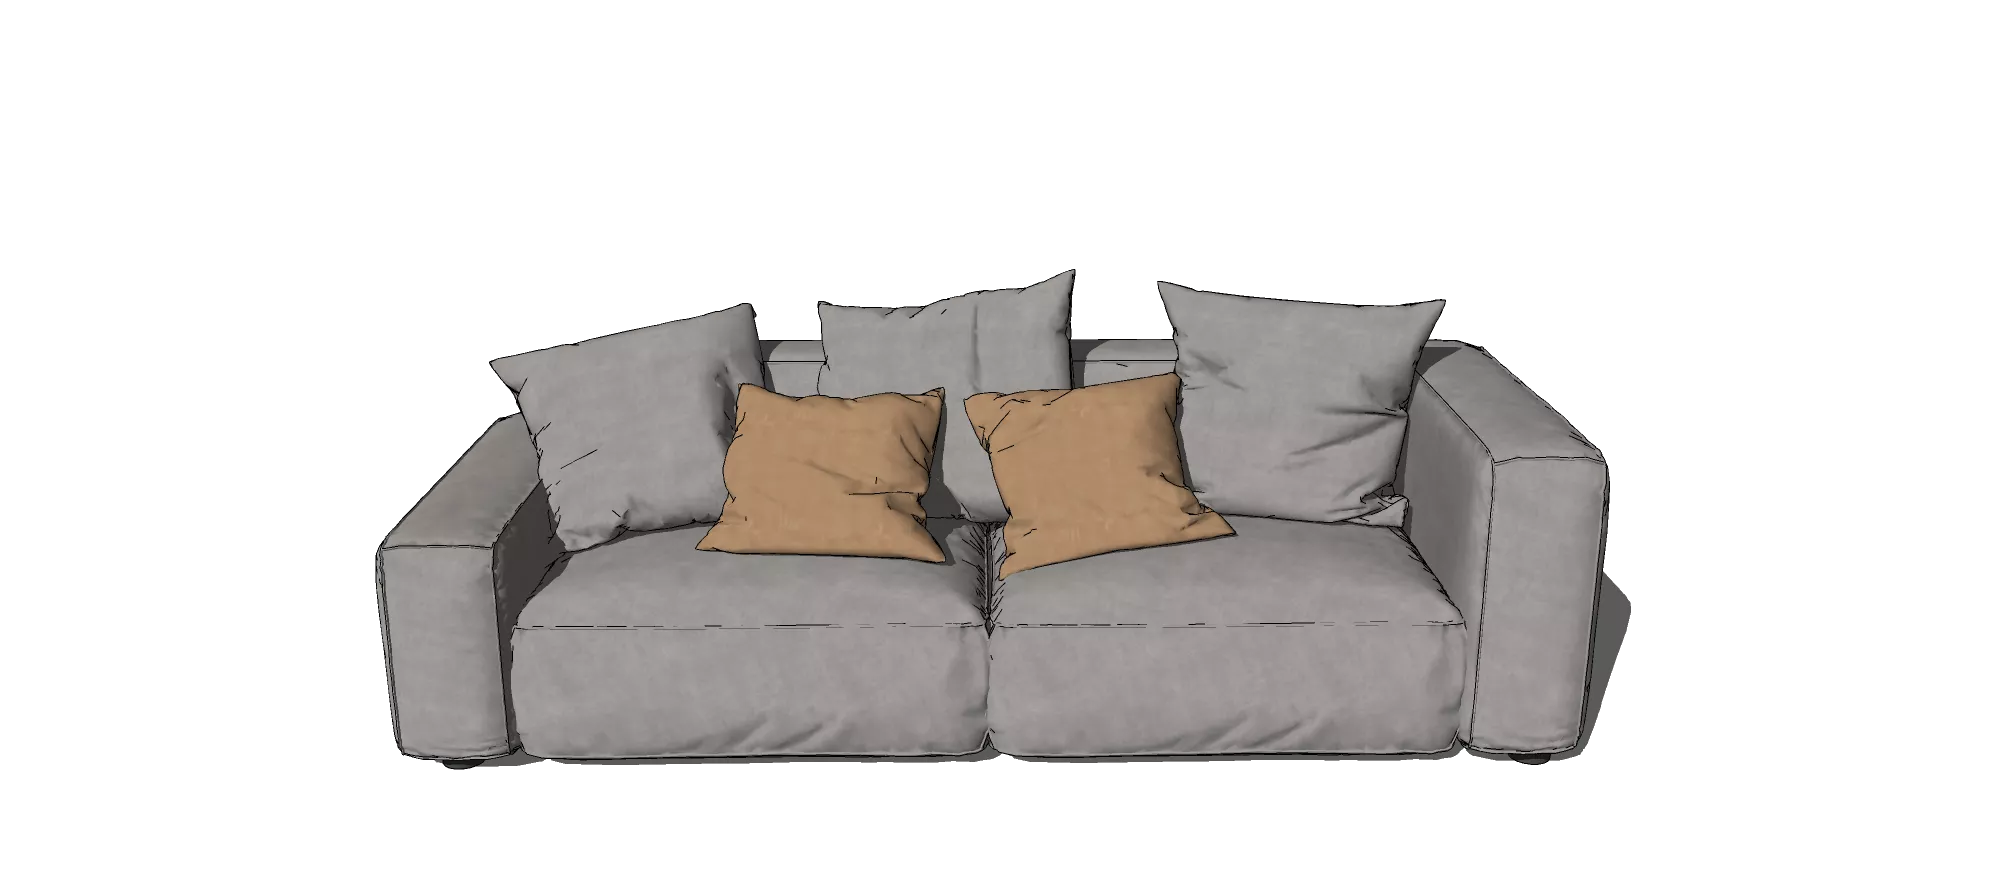 MODERN SOFA - SKETCHUP 3D MODEL - VRAY OR ENSCAPE - ID13110